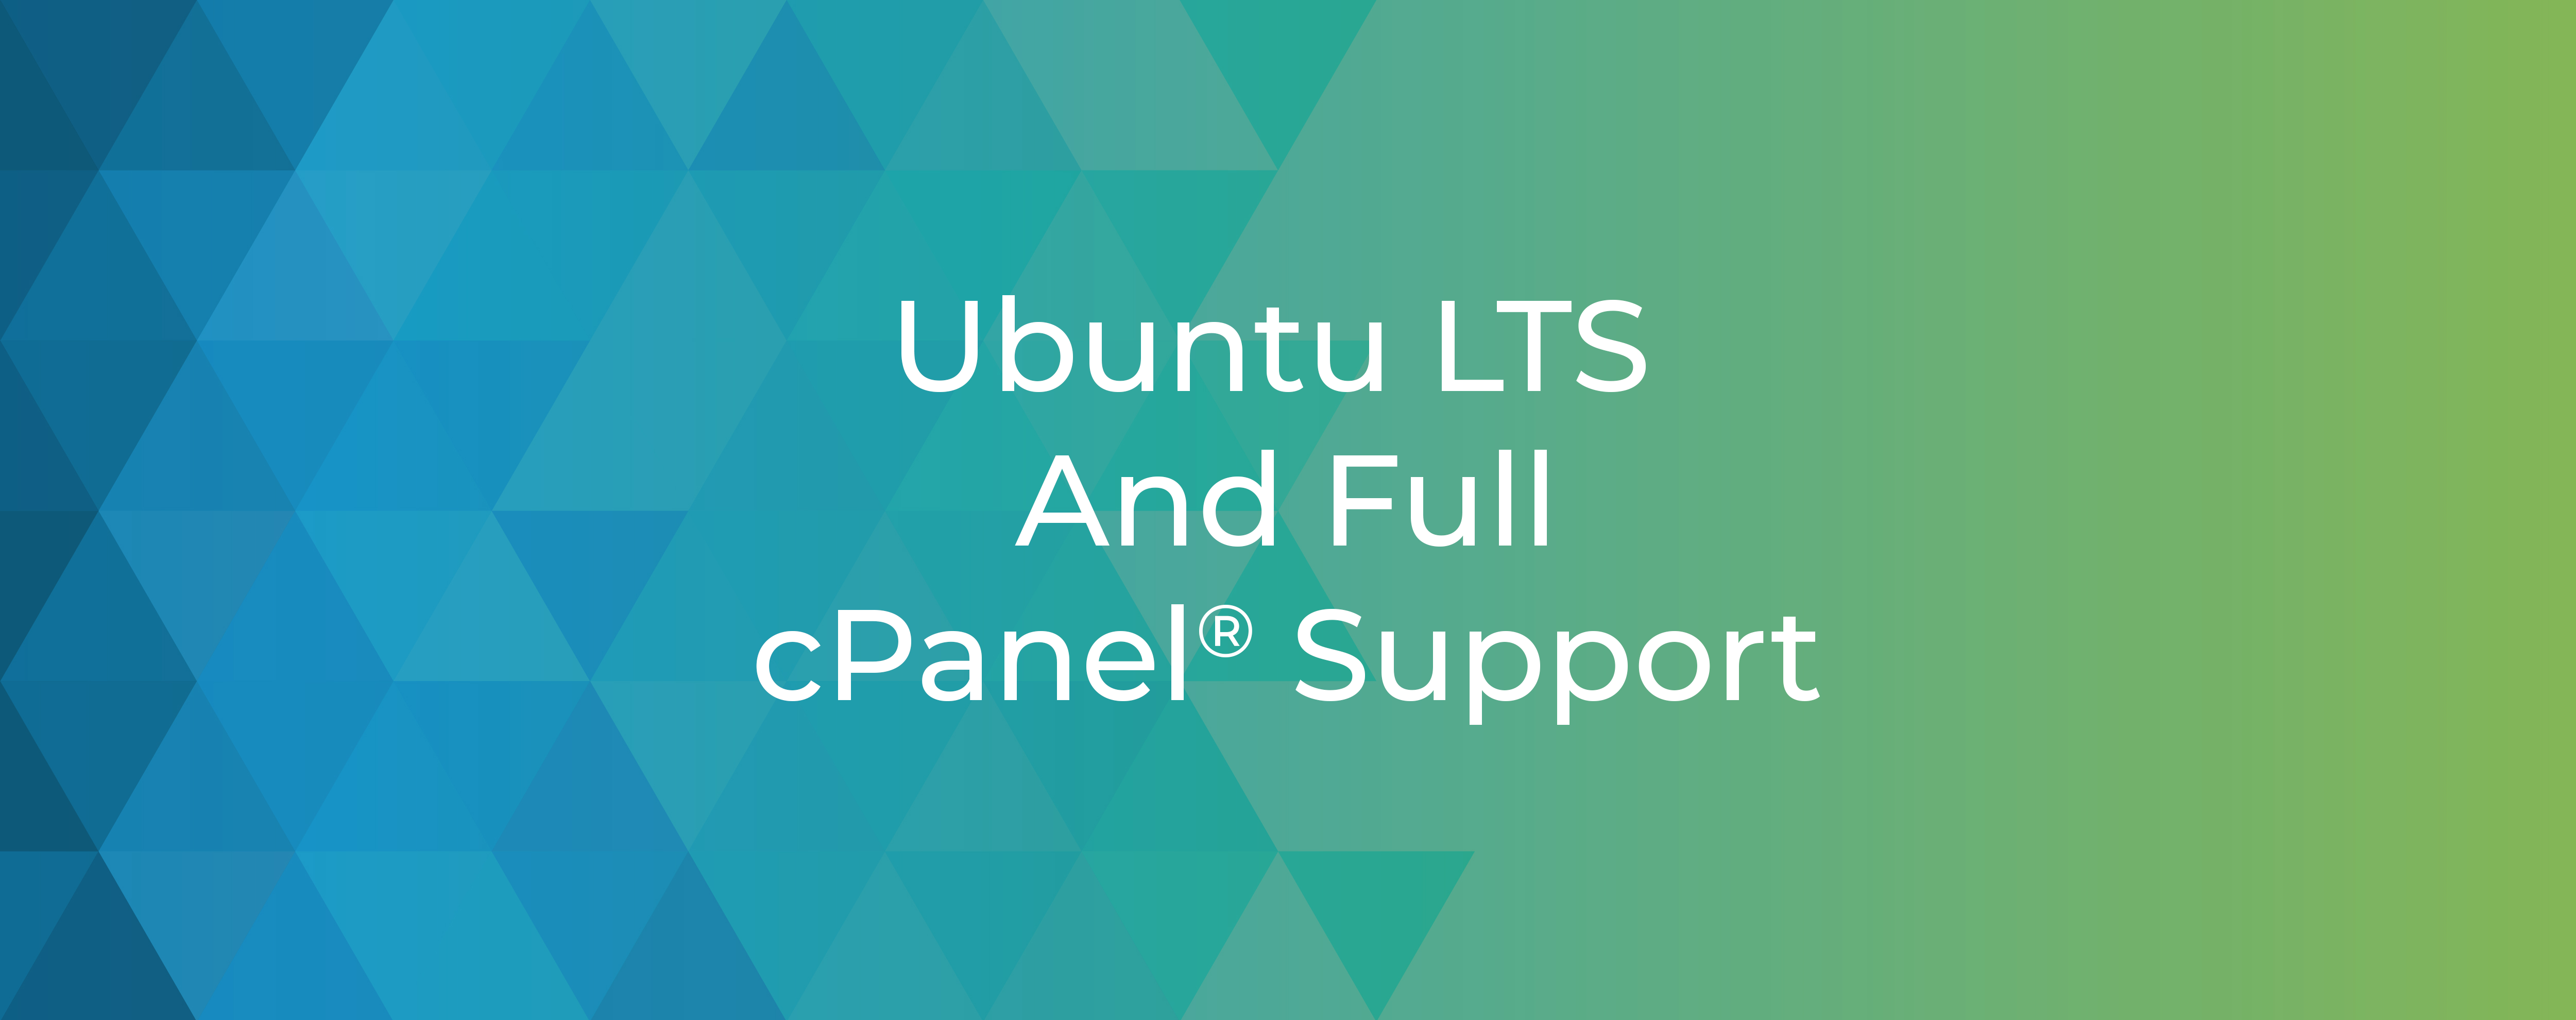 Ubuntu LTS And Full cPanel® Support